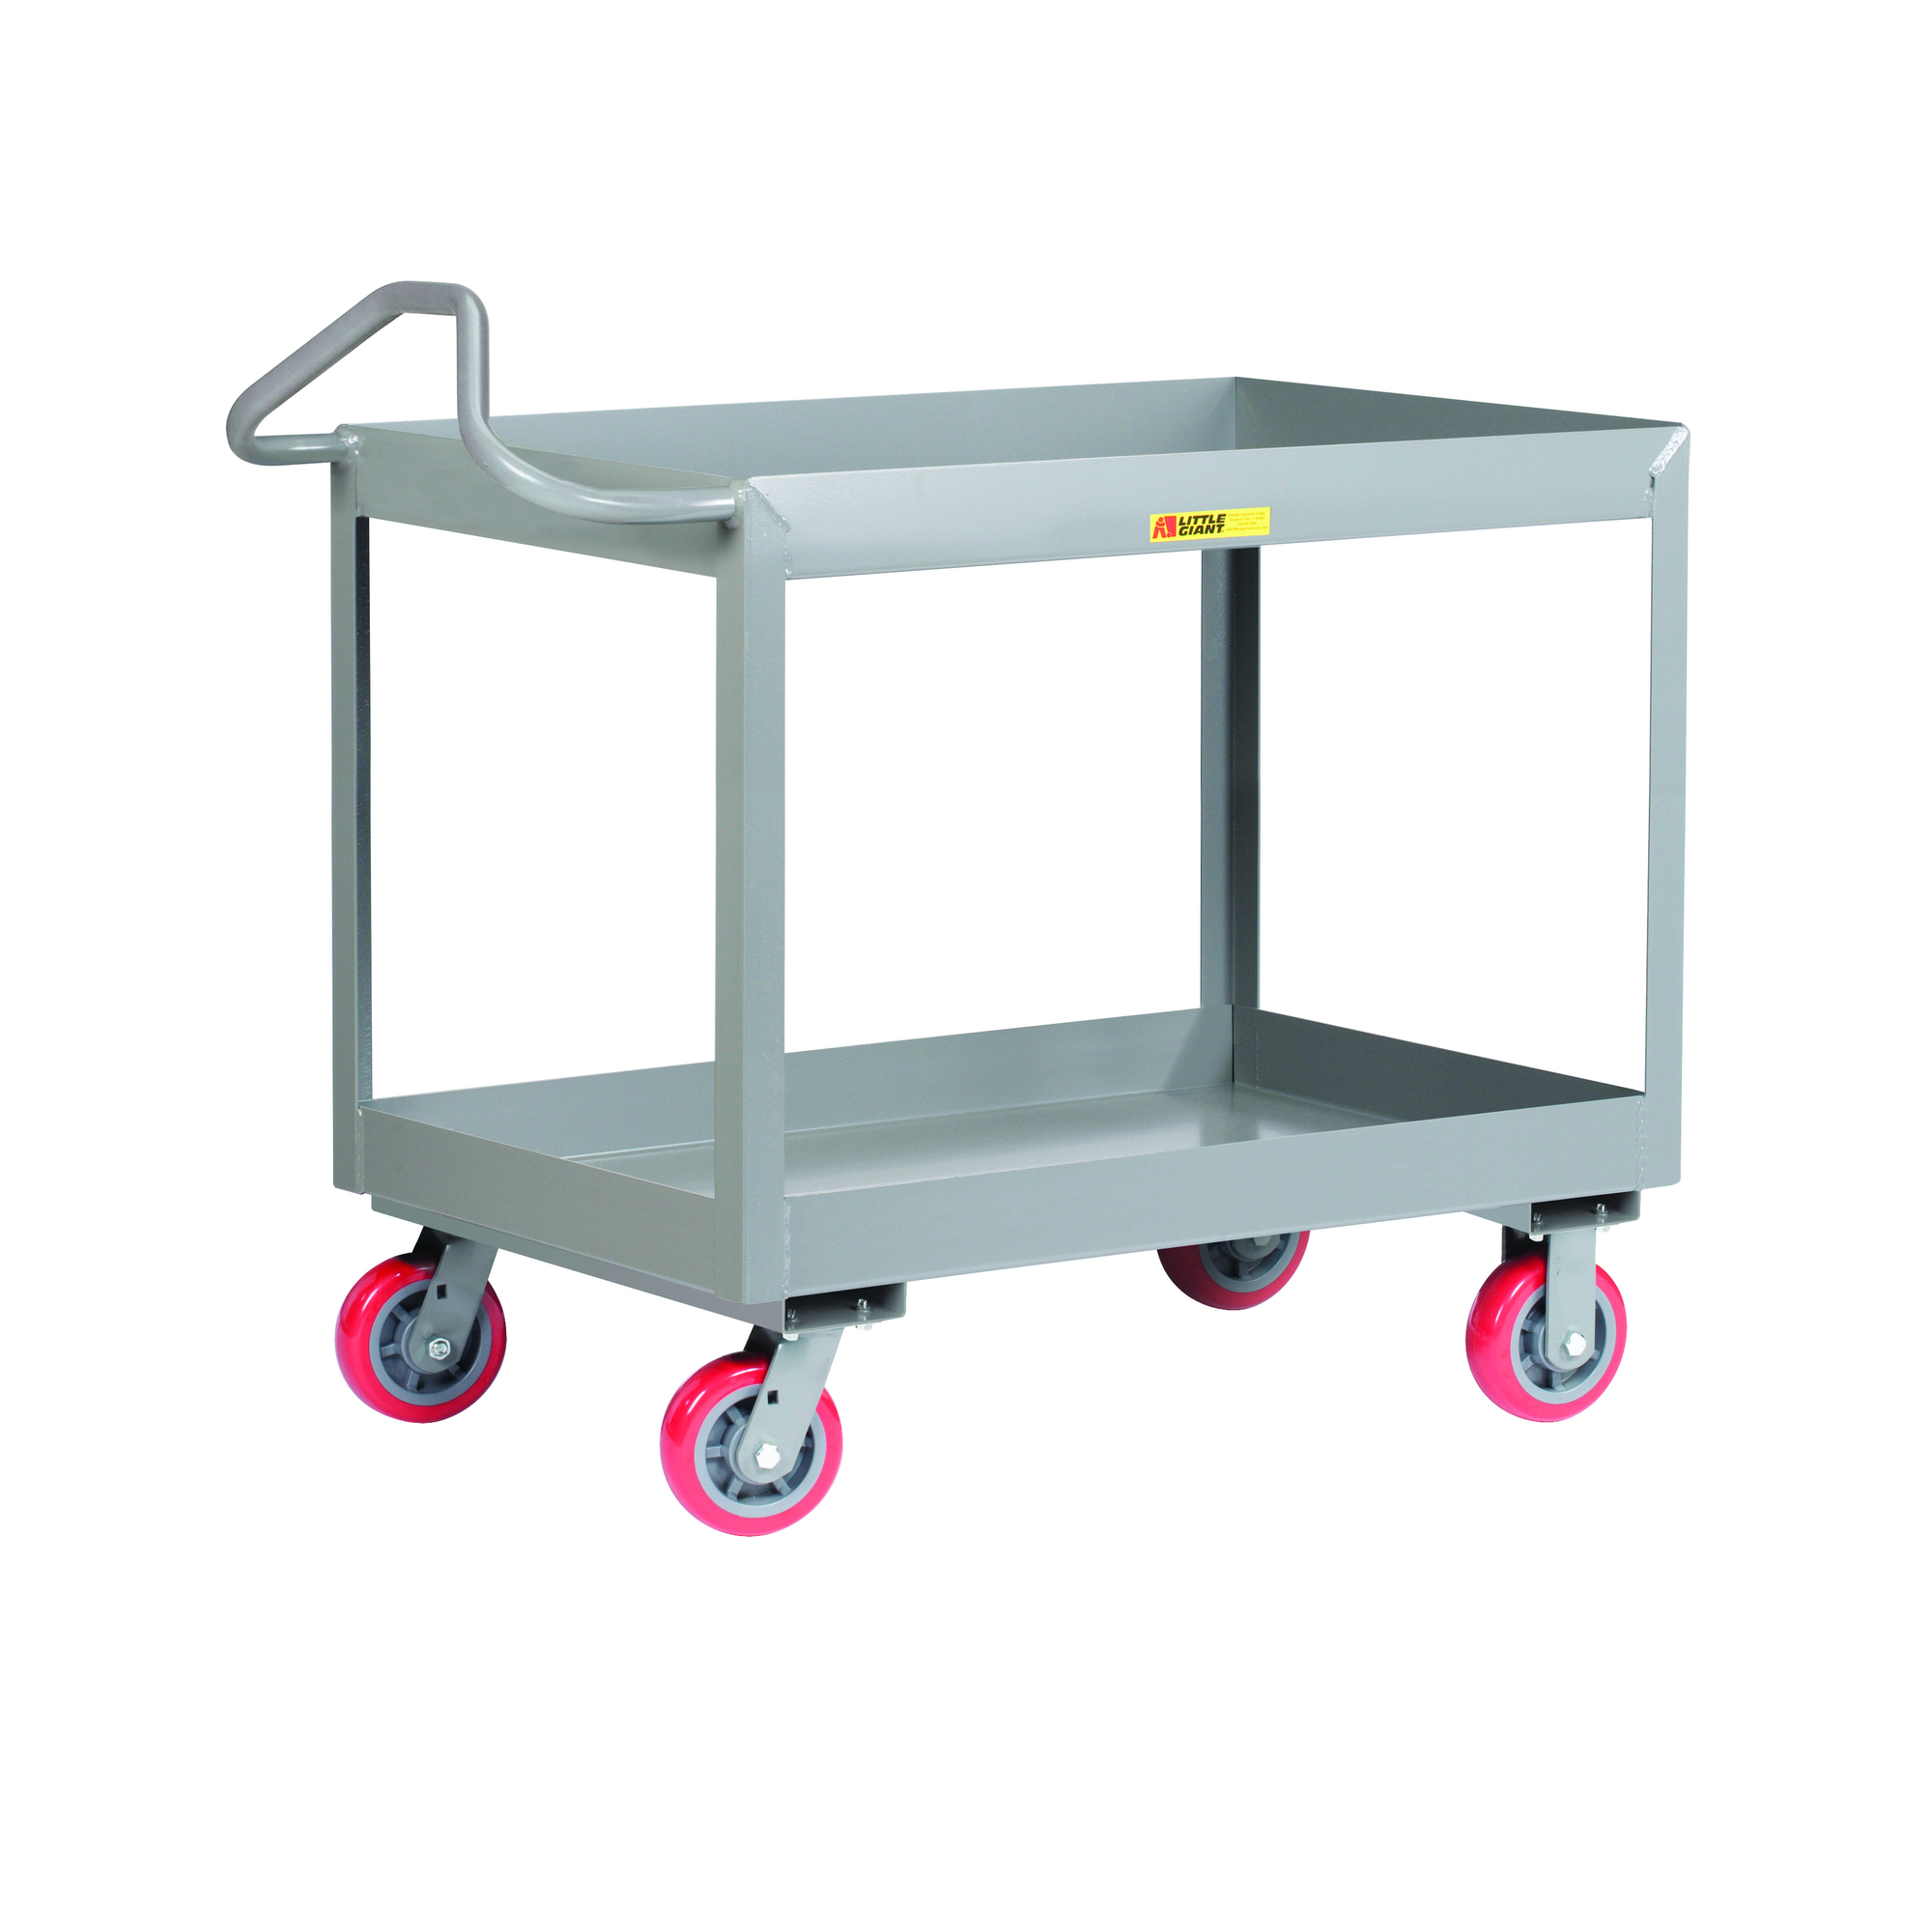 Little Giant, 3Inch Deep Shelf Truck, Ergo Handle, 30x60, 3600 lbs, Total Capacity 3600 lb, Shelves (qty.) 2, Material Carbon Steel, Model ENDS-3060X3